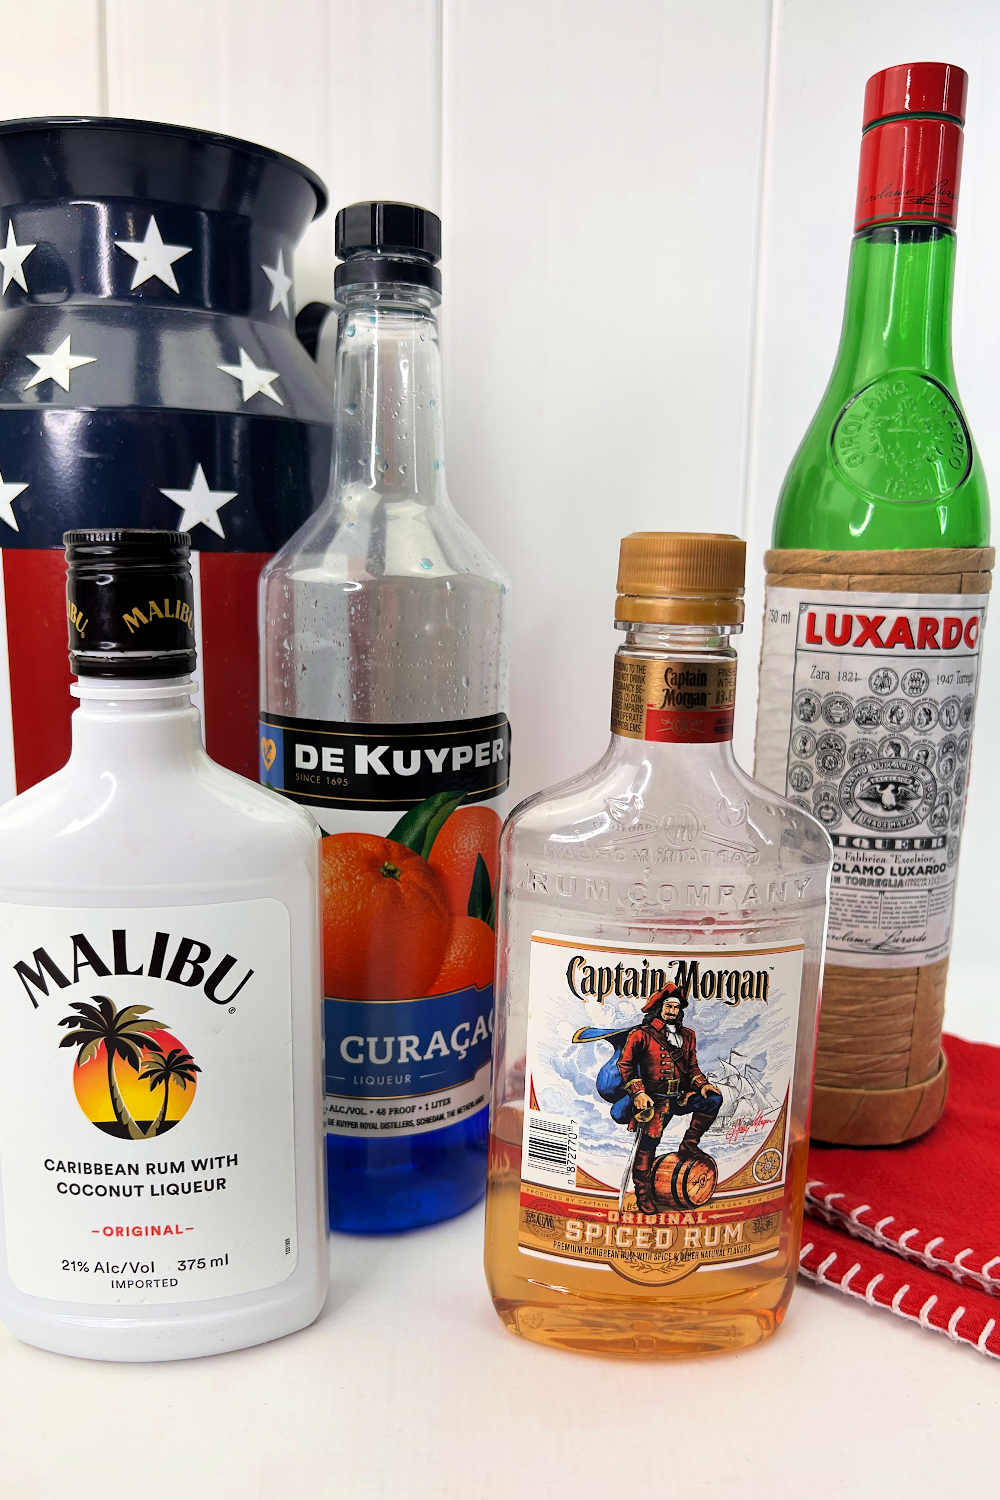 Bottles of Malibu Rum, Grenadine, Spiced Rum and Blue Curacao are the alcohol used in this patriotic cocktail.

